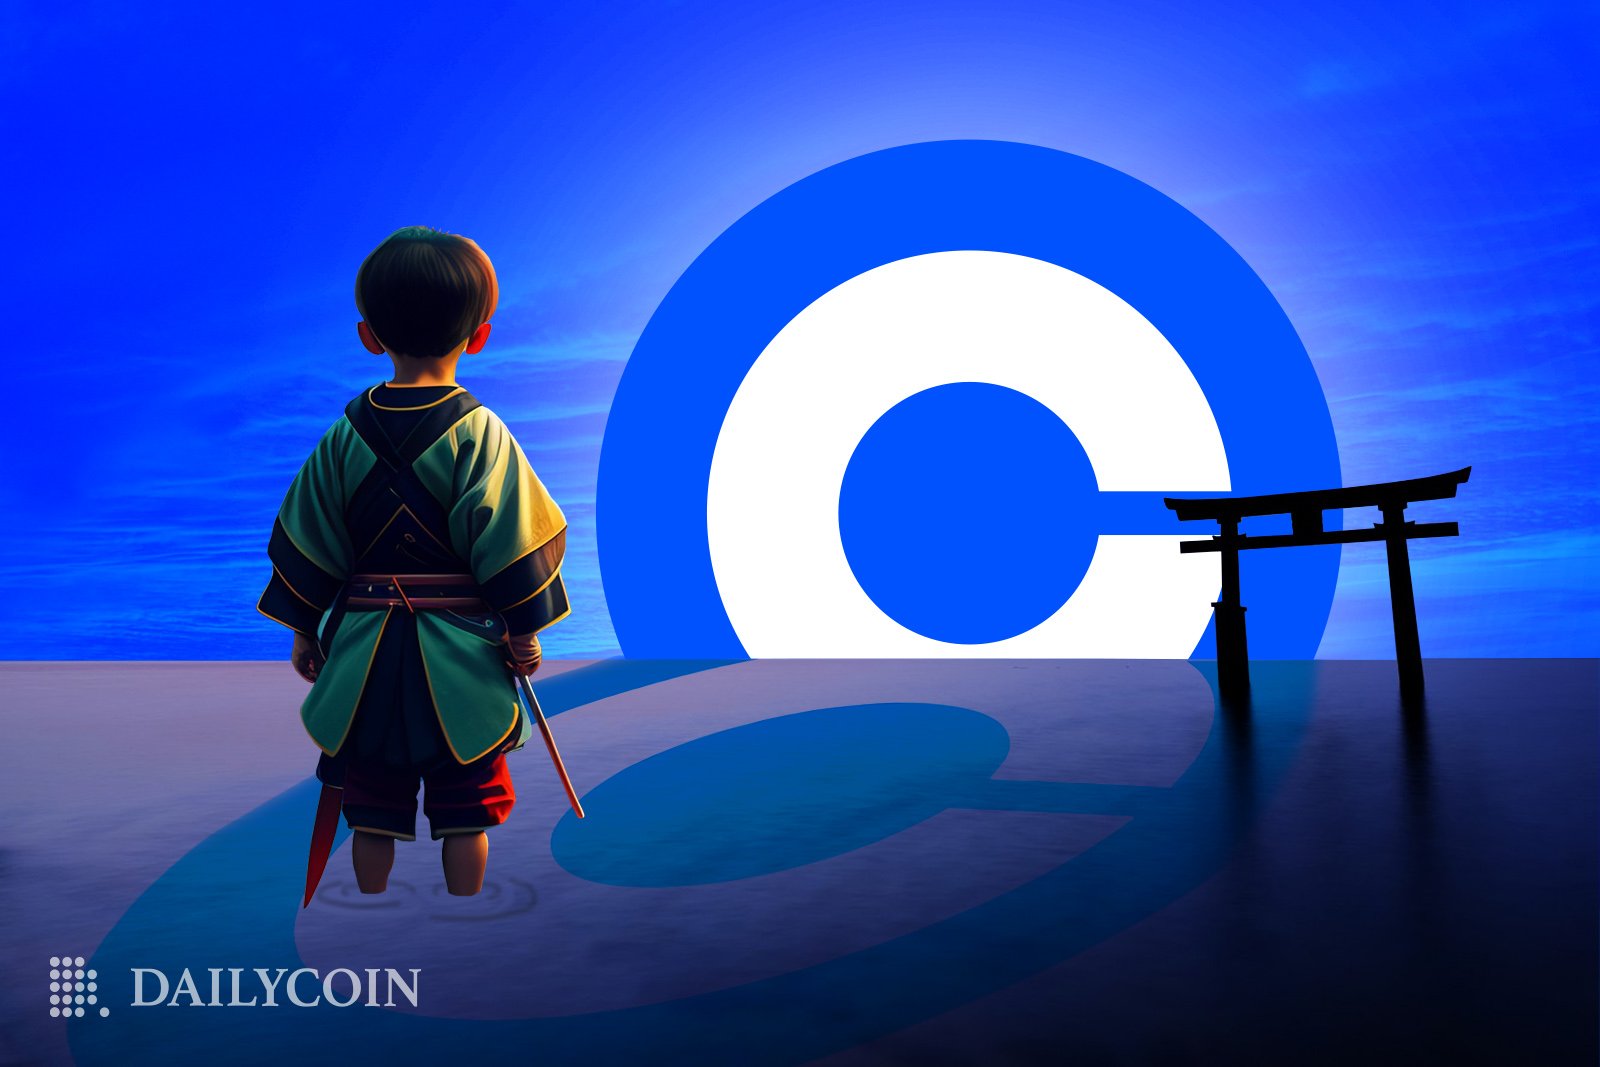 A small child wearing traditional Japanese outfit staring at a Coinbase logo instead of a sundown.